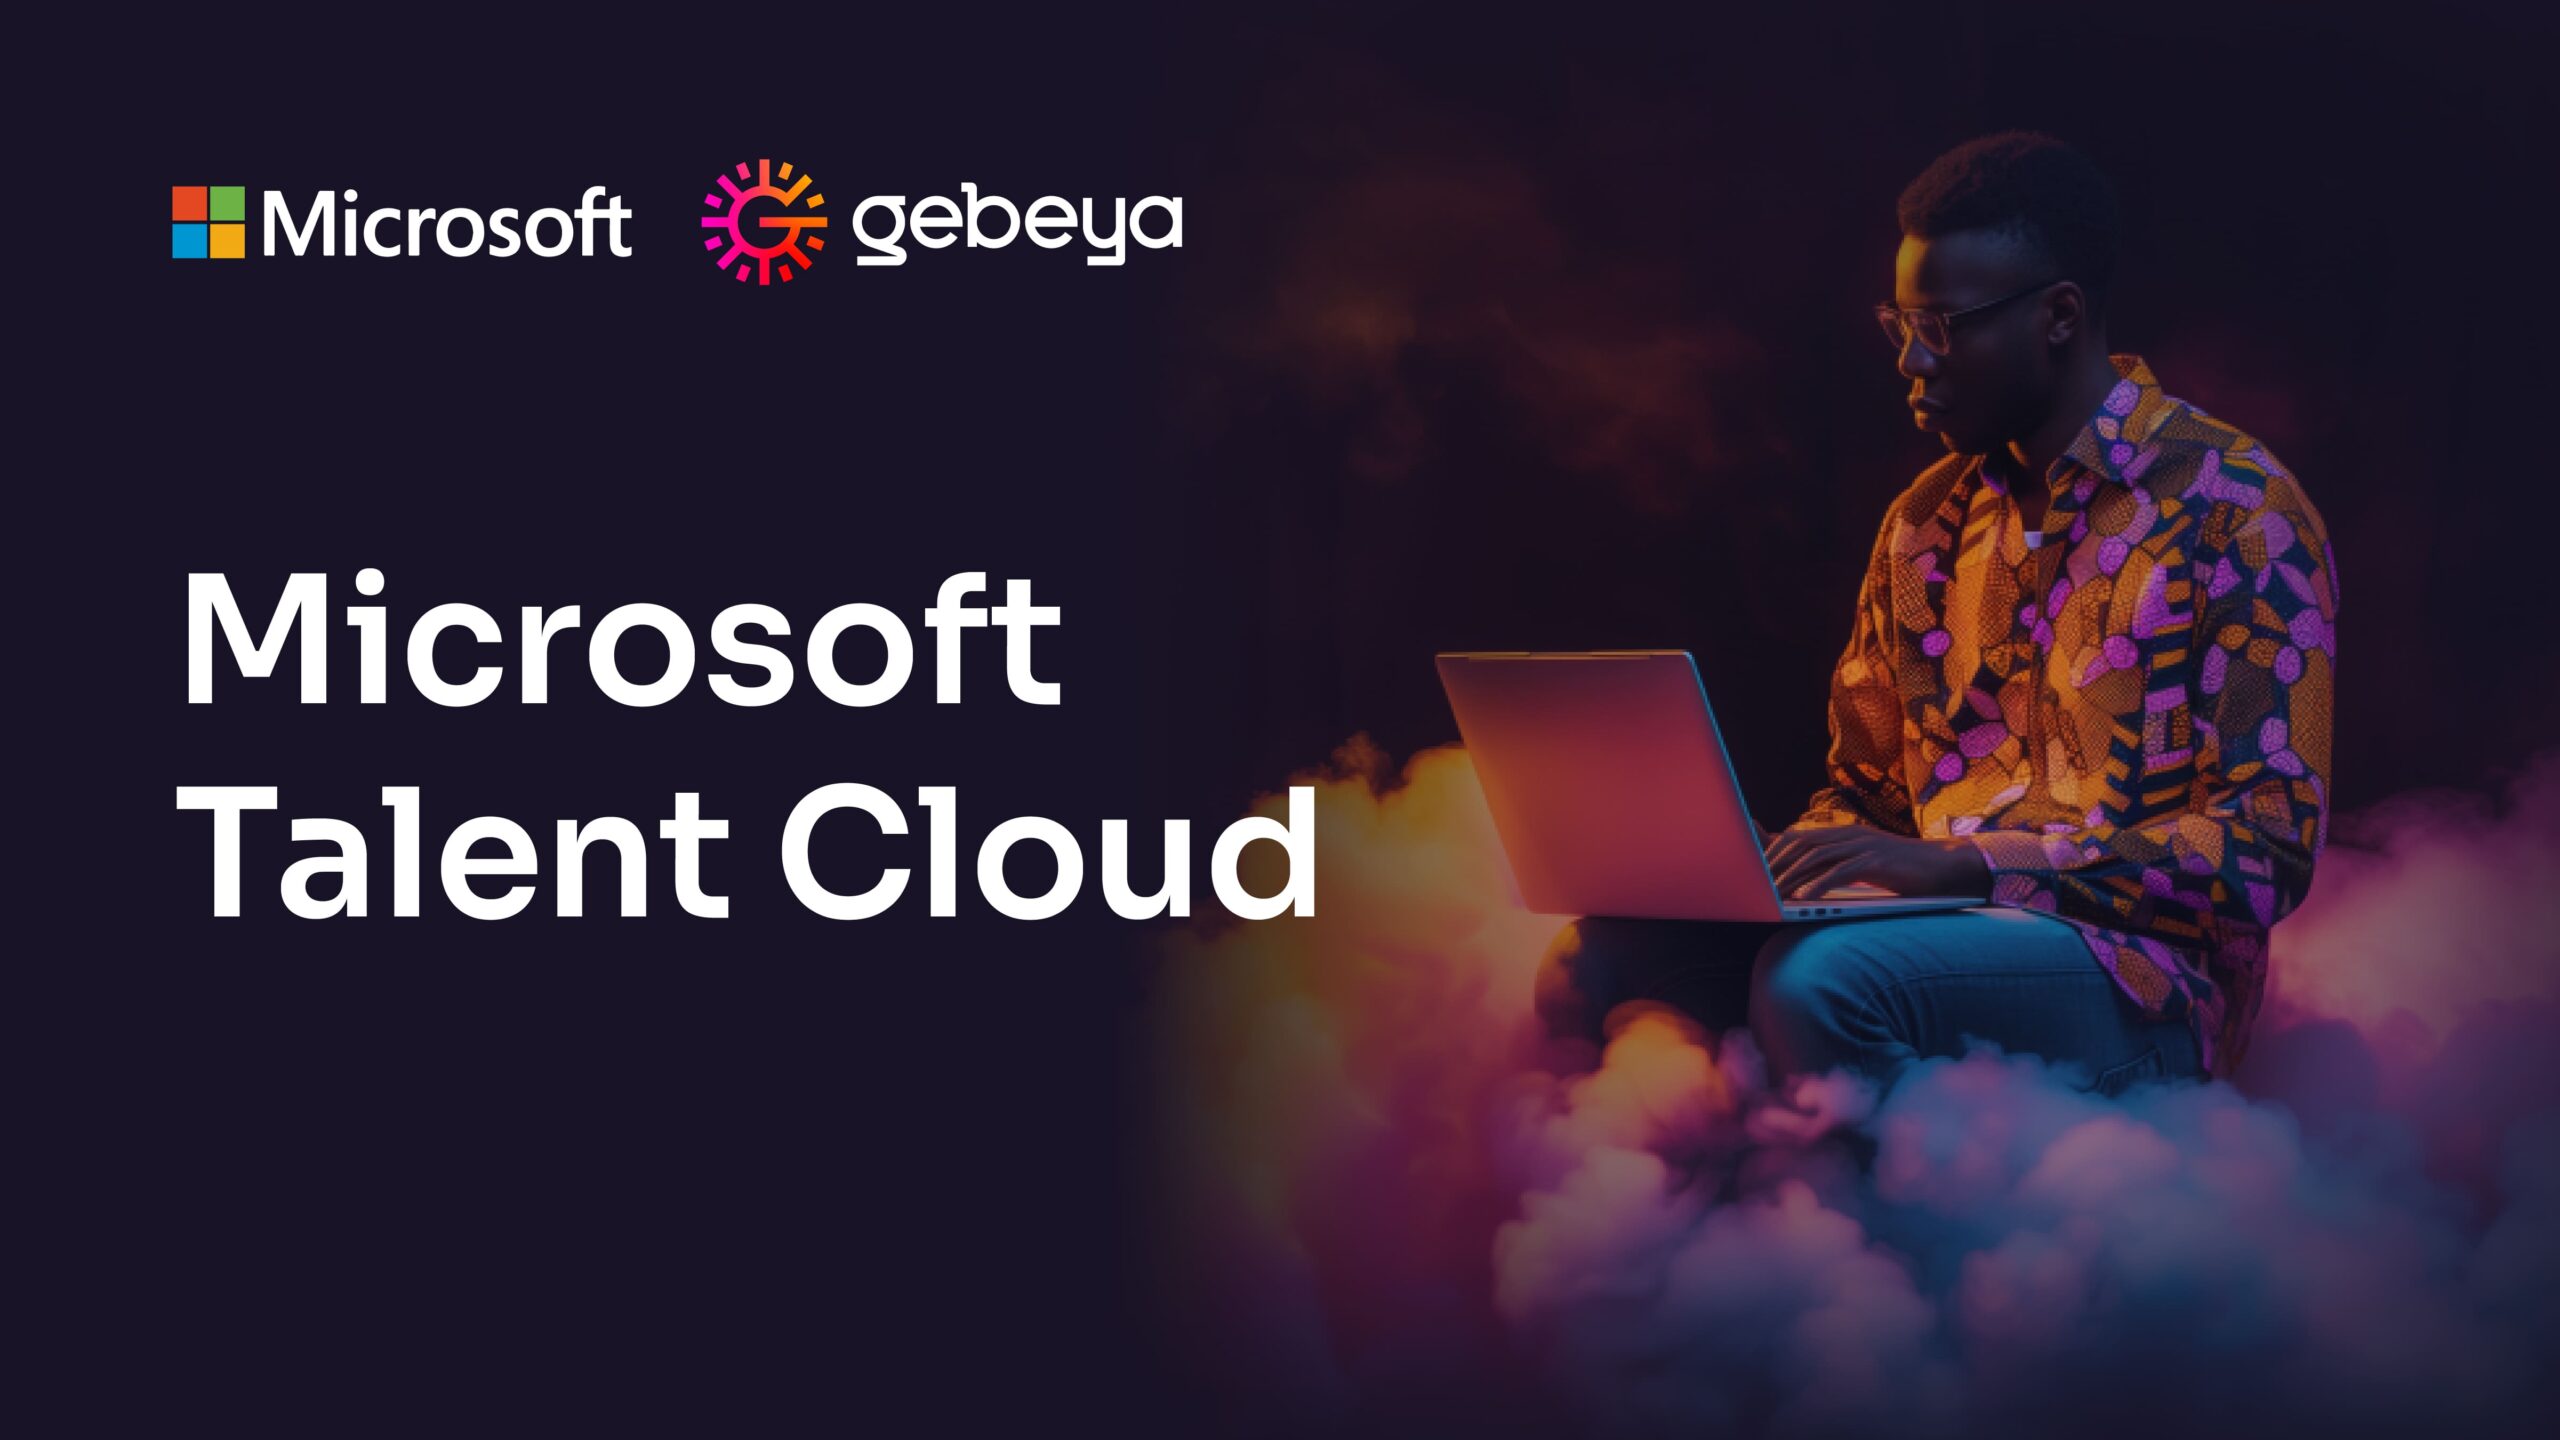 The Microsoft Talent Cloud is a gateway that aims to empower 300,000 African tech talents over the next 3 years with Microsoft-focused cloud and AI skills